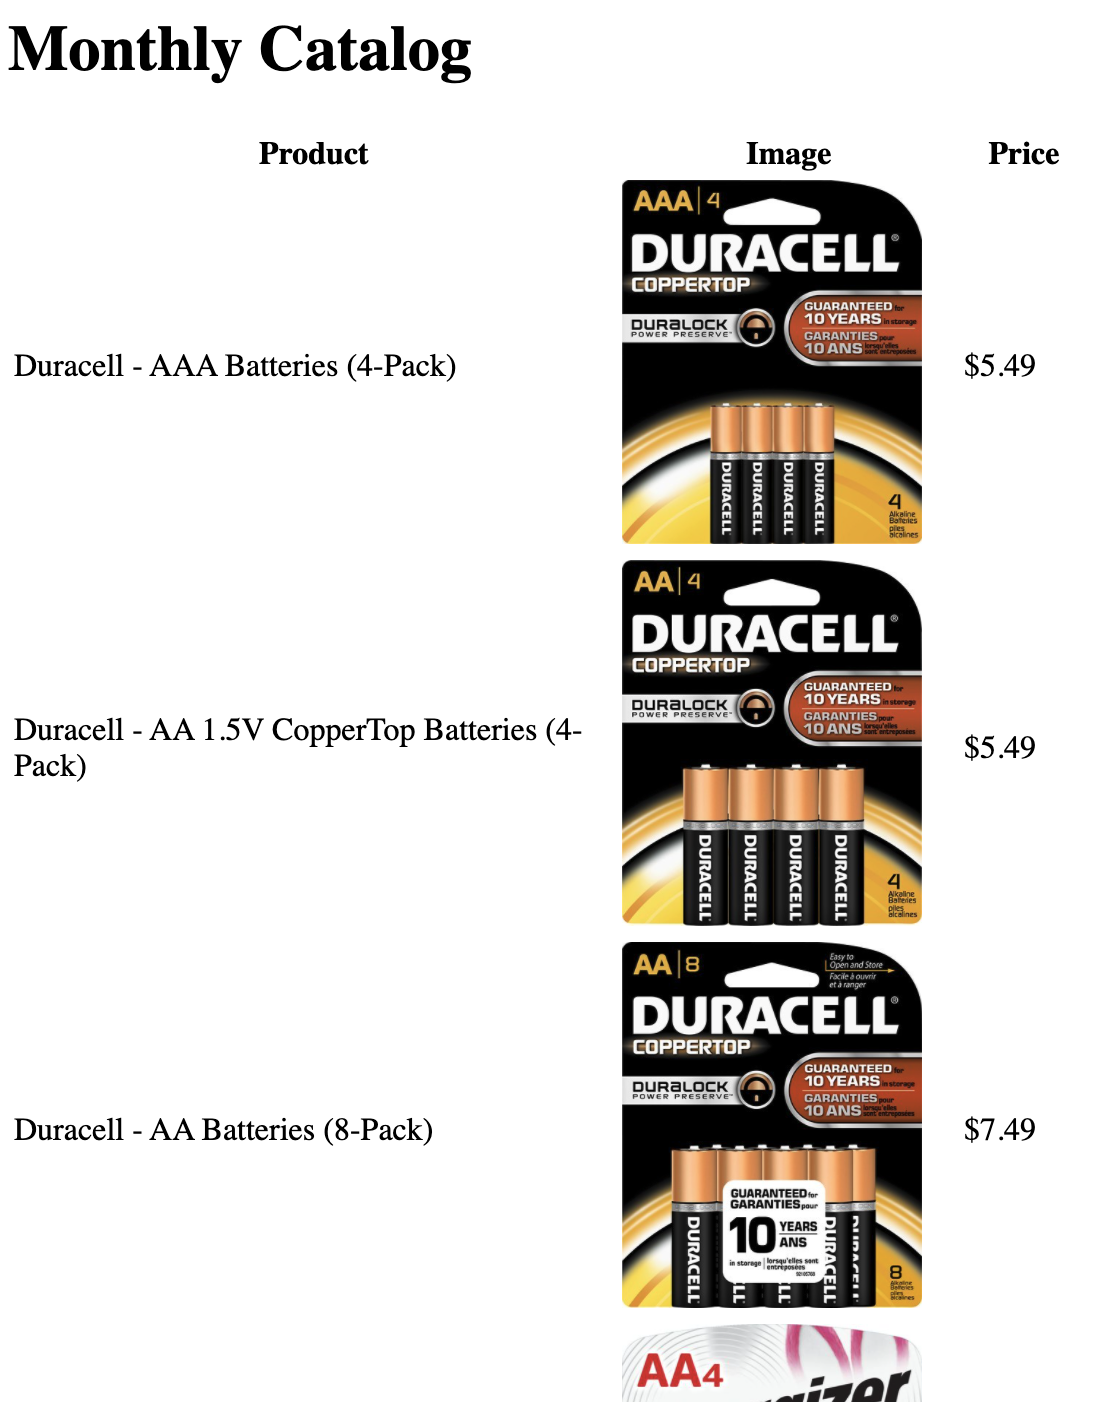 Image of a partial email, titled "Monthly Catalog". The email contains a table three columns labeled "Product", "Image", and "Price". The first four rows of the table are shown, and include names, images, and prices for miscellaneous batteries.